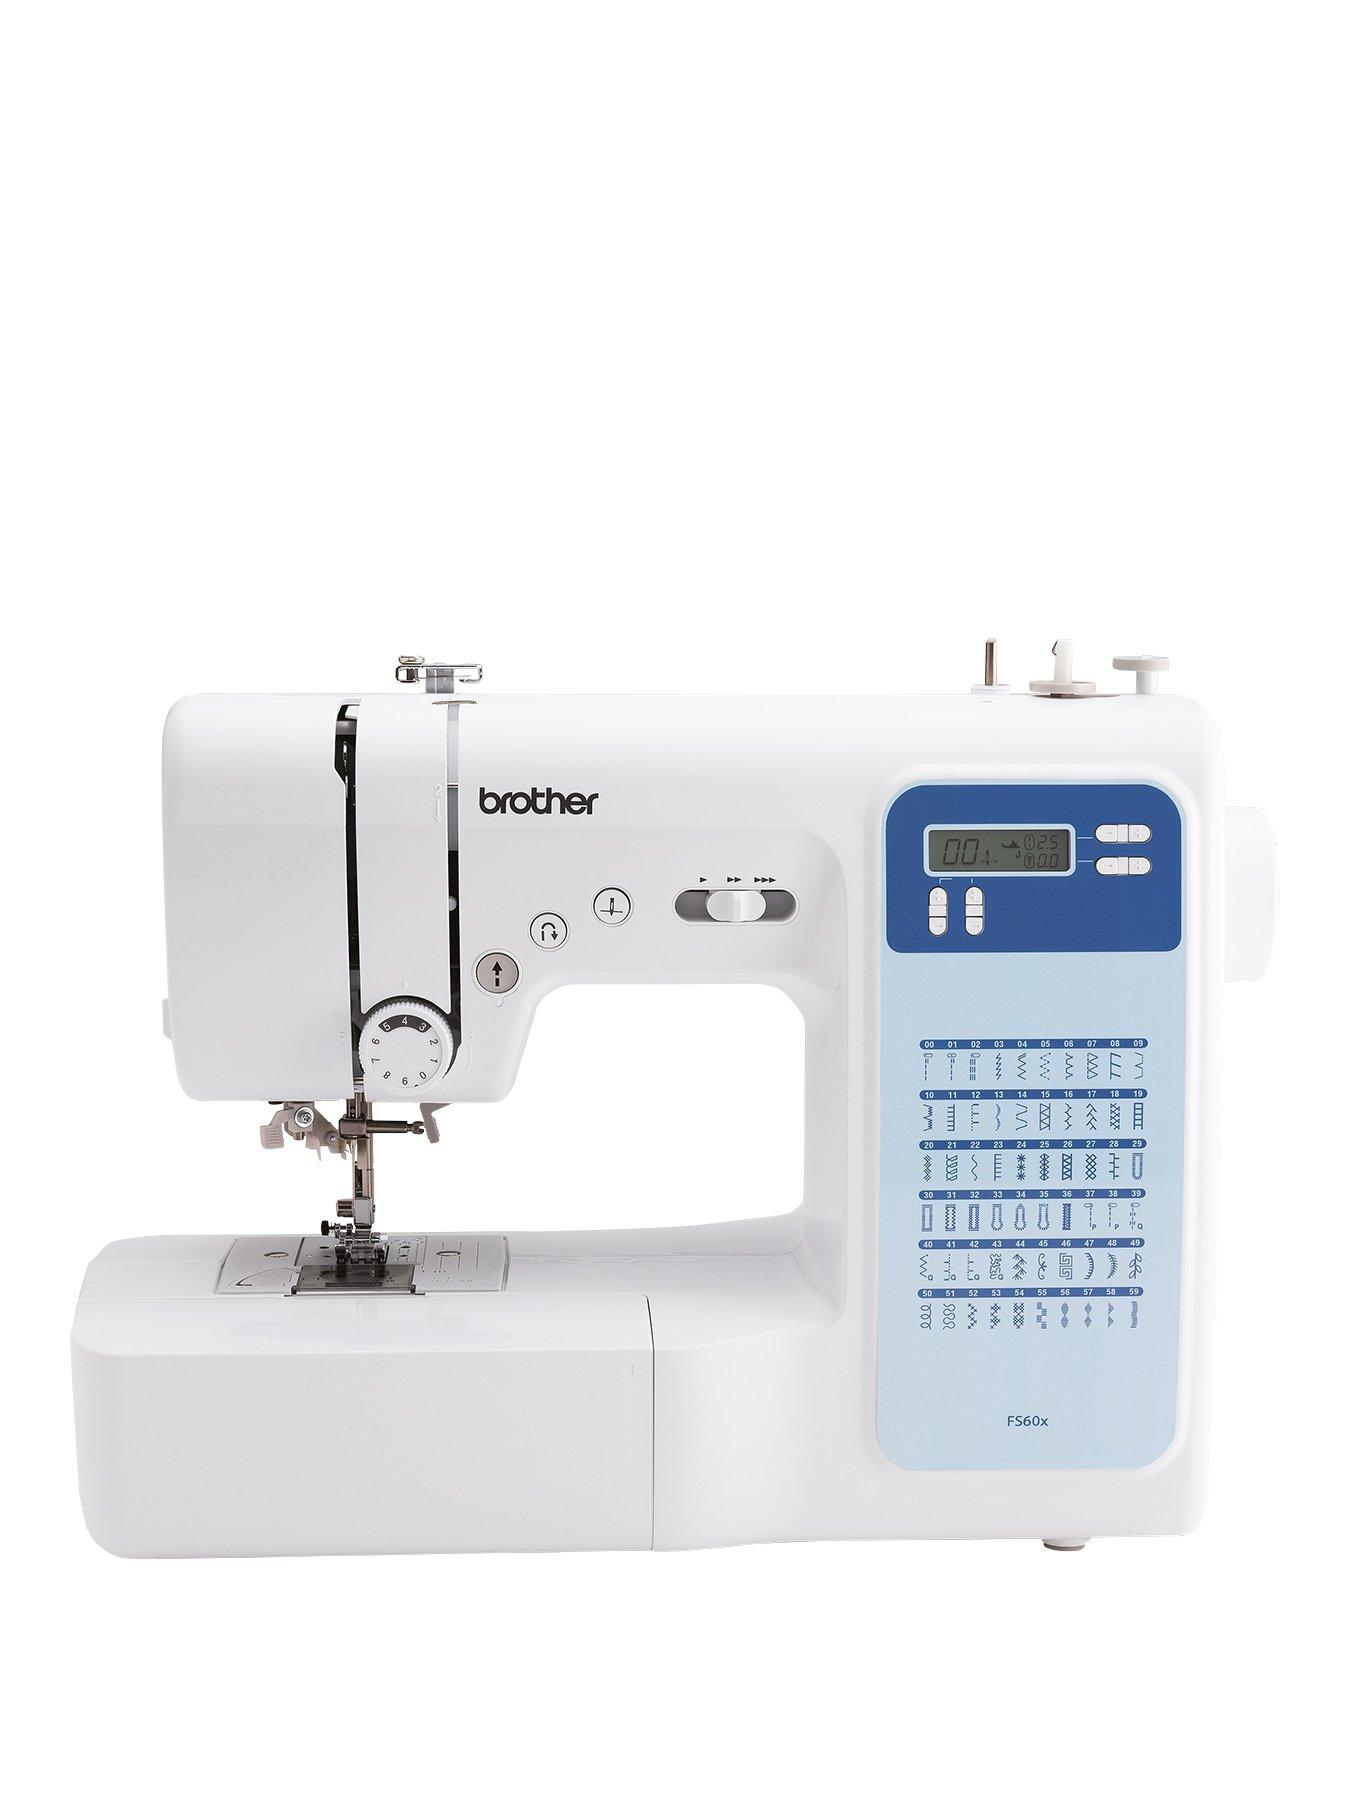 Small Sewing Machine - Shop online and save up to 21%, UK